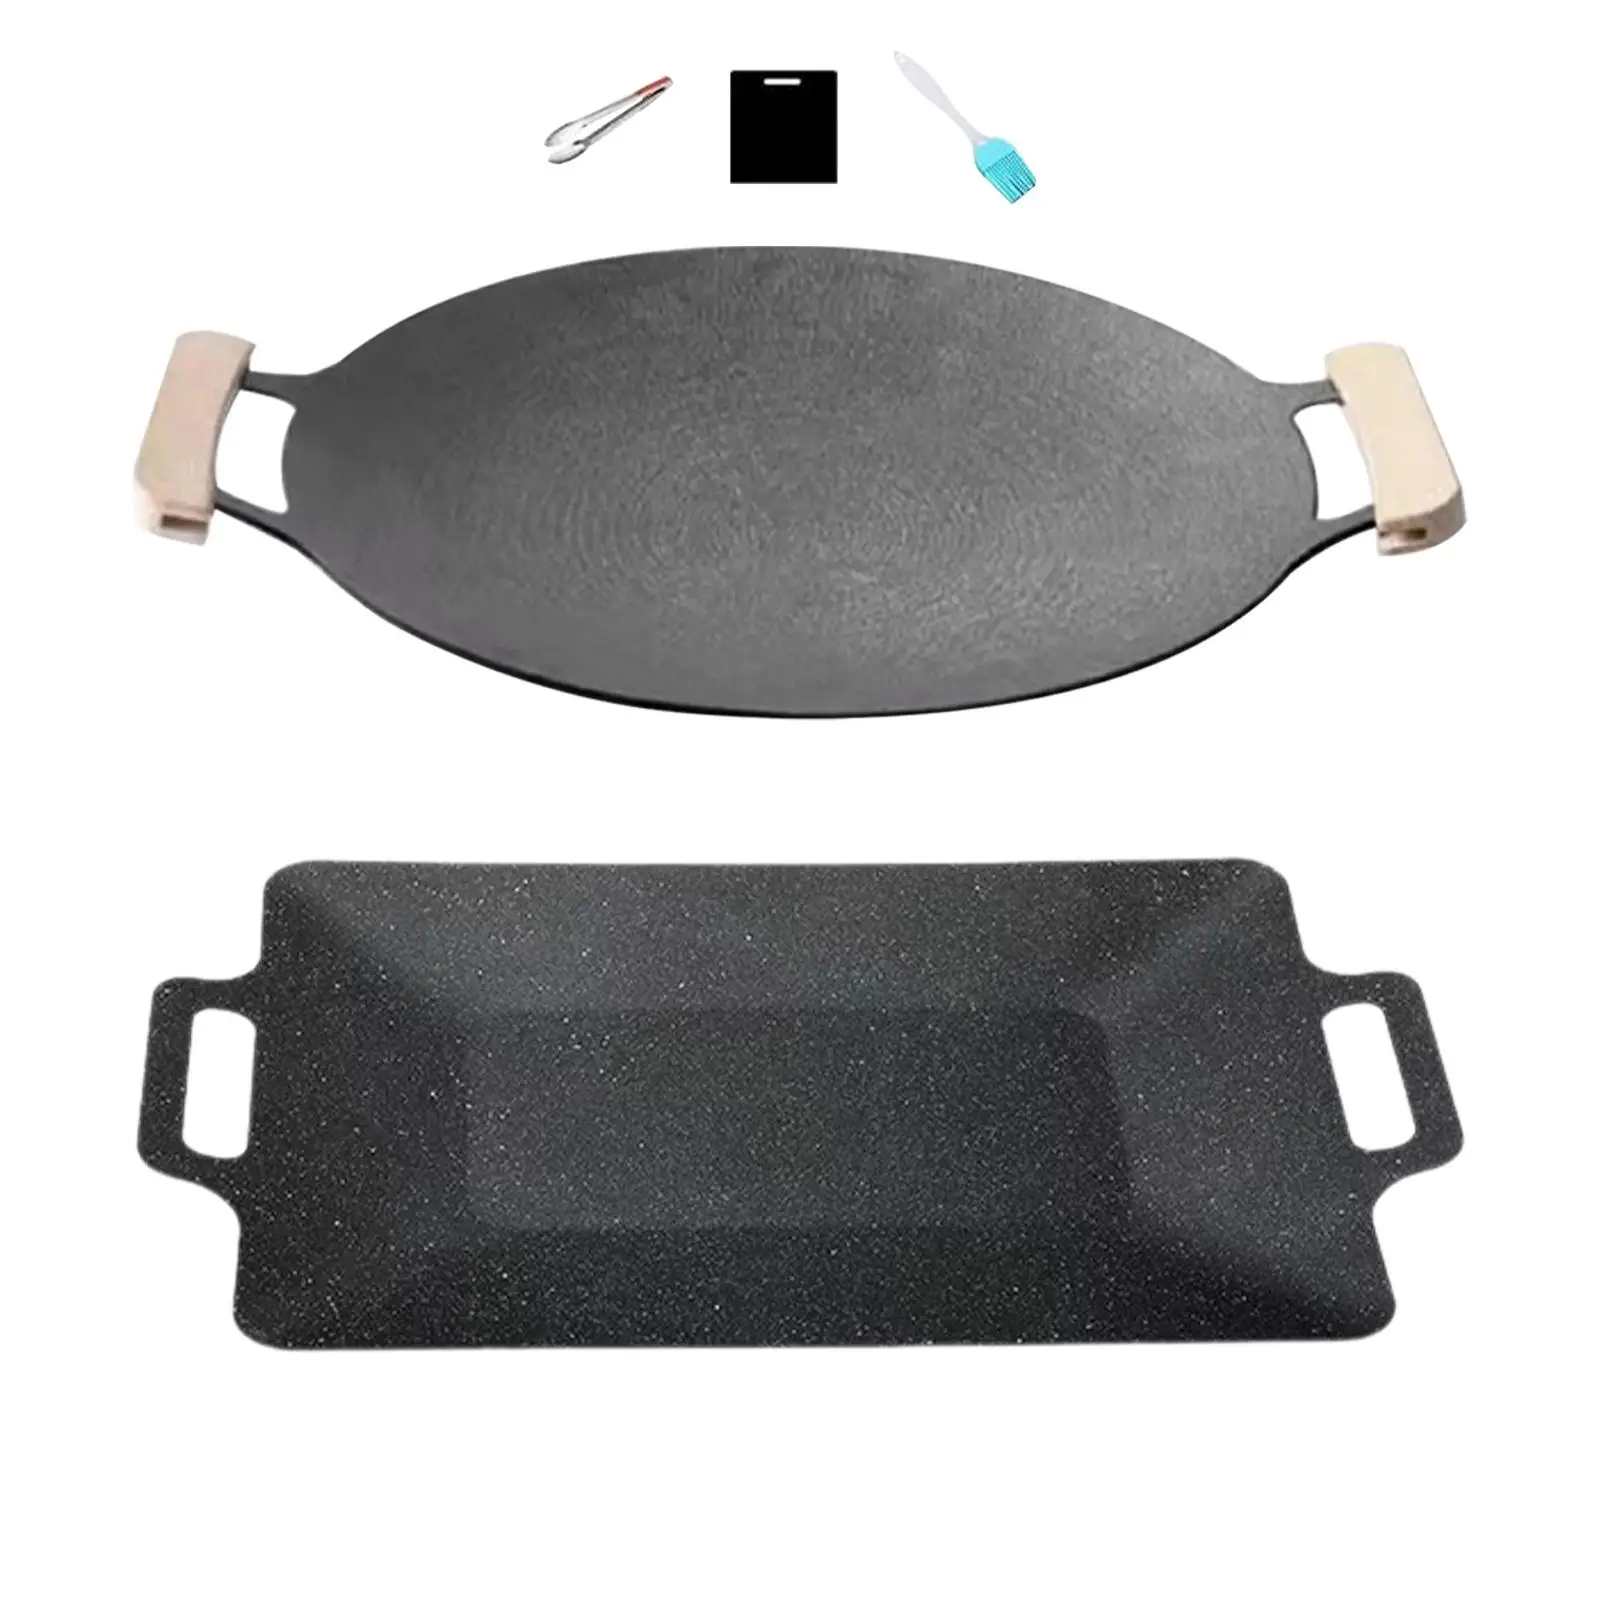 Korean BBQ Pan Barbecue Grill Cookware with Handles Frying Pan Griddle Pan for Hiking Travel Camping Picnic Kitchen